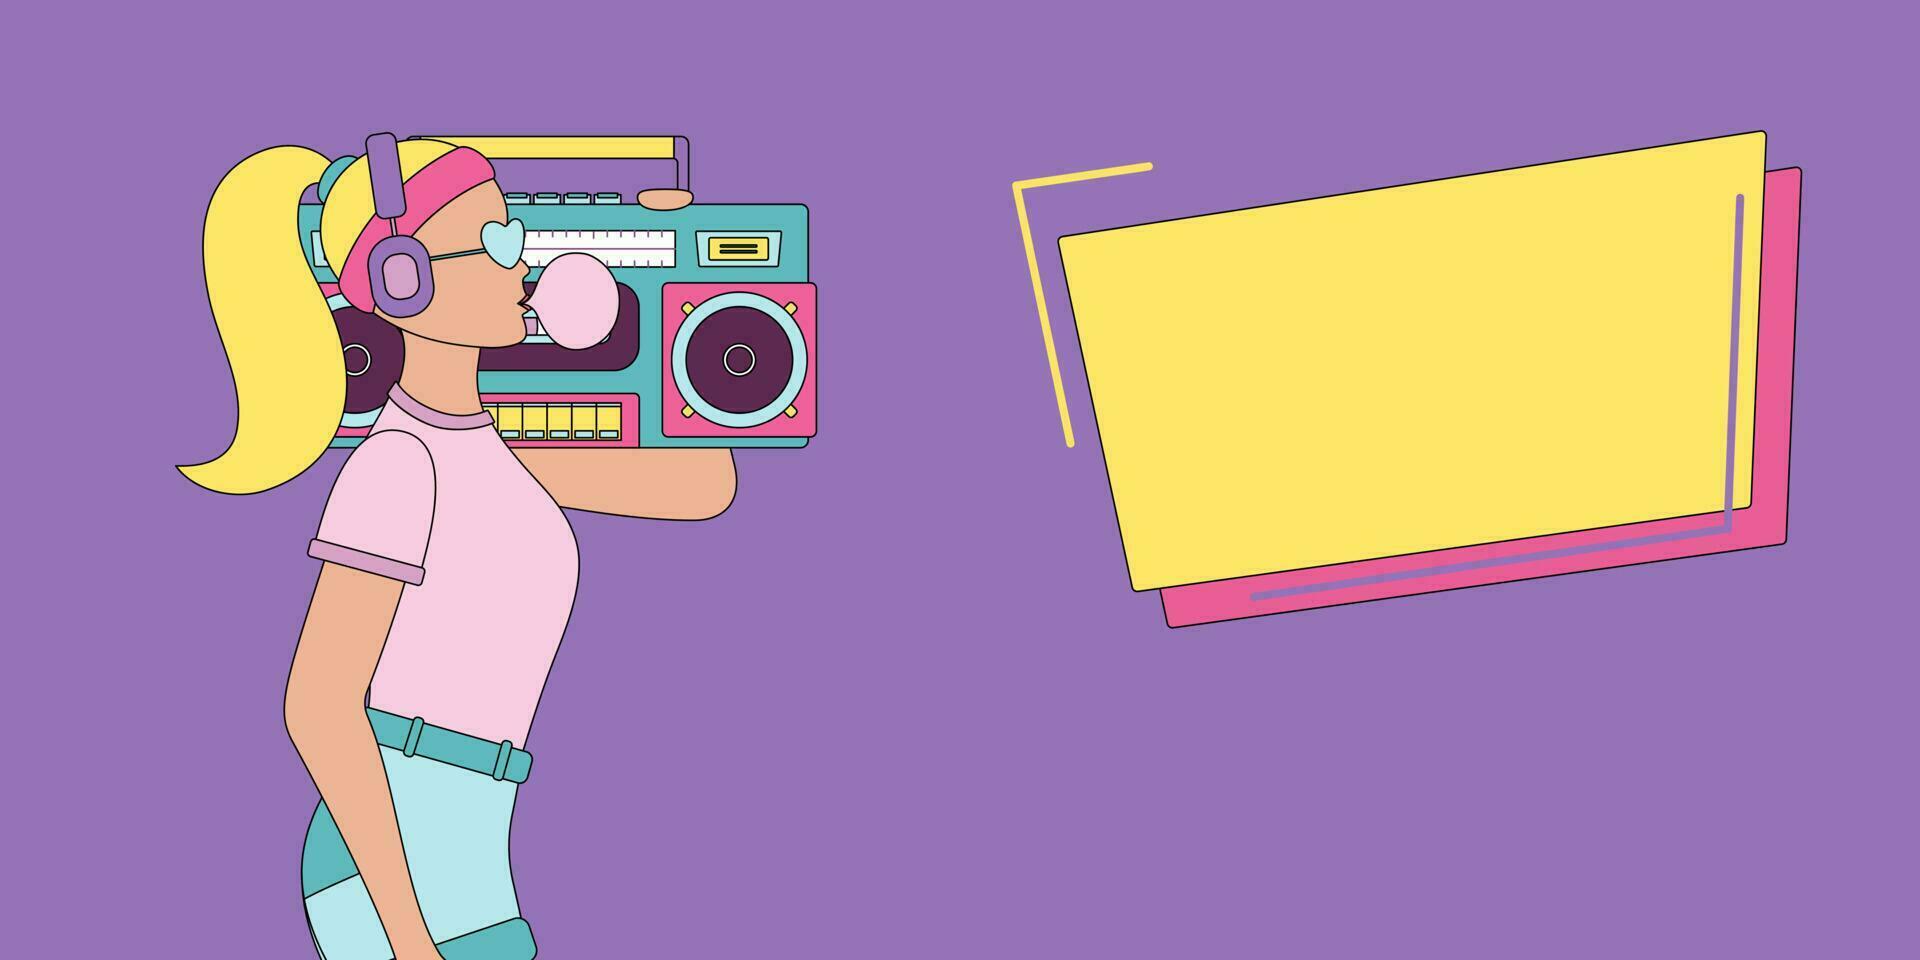 Fashionable girl with tape recorder. Retro fashion style from 80-90s. Vector illustration with background.